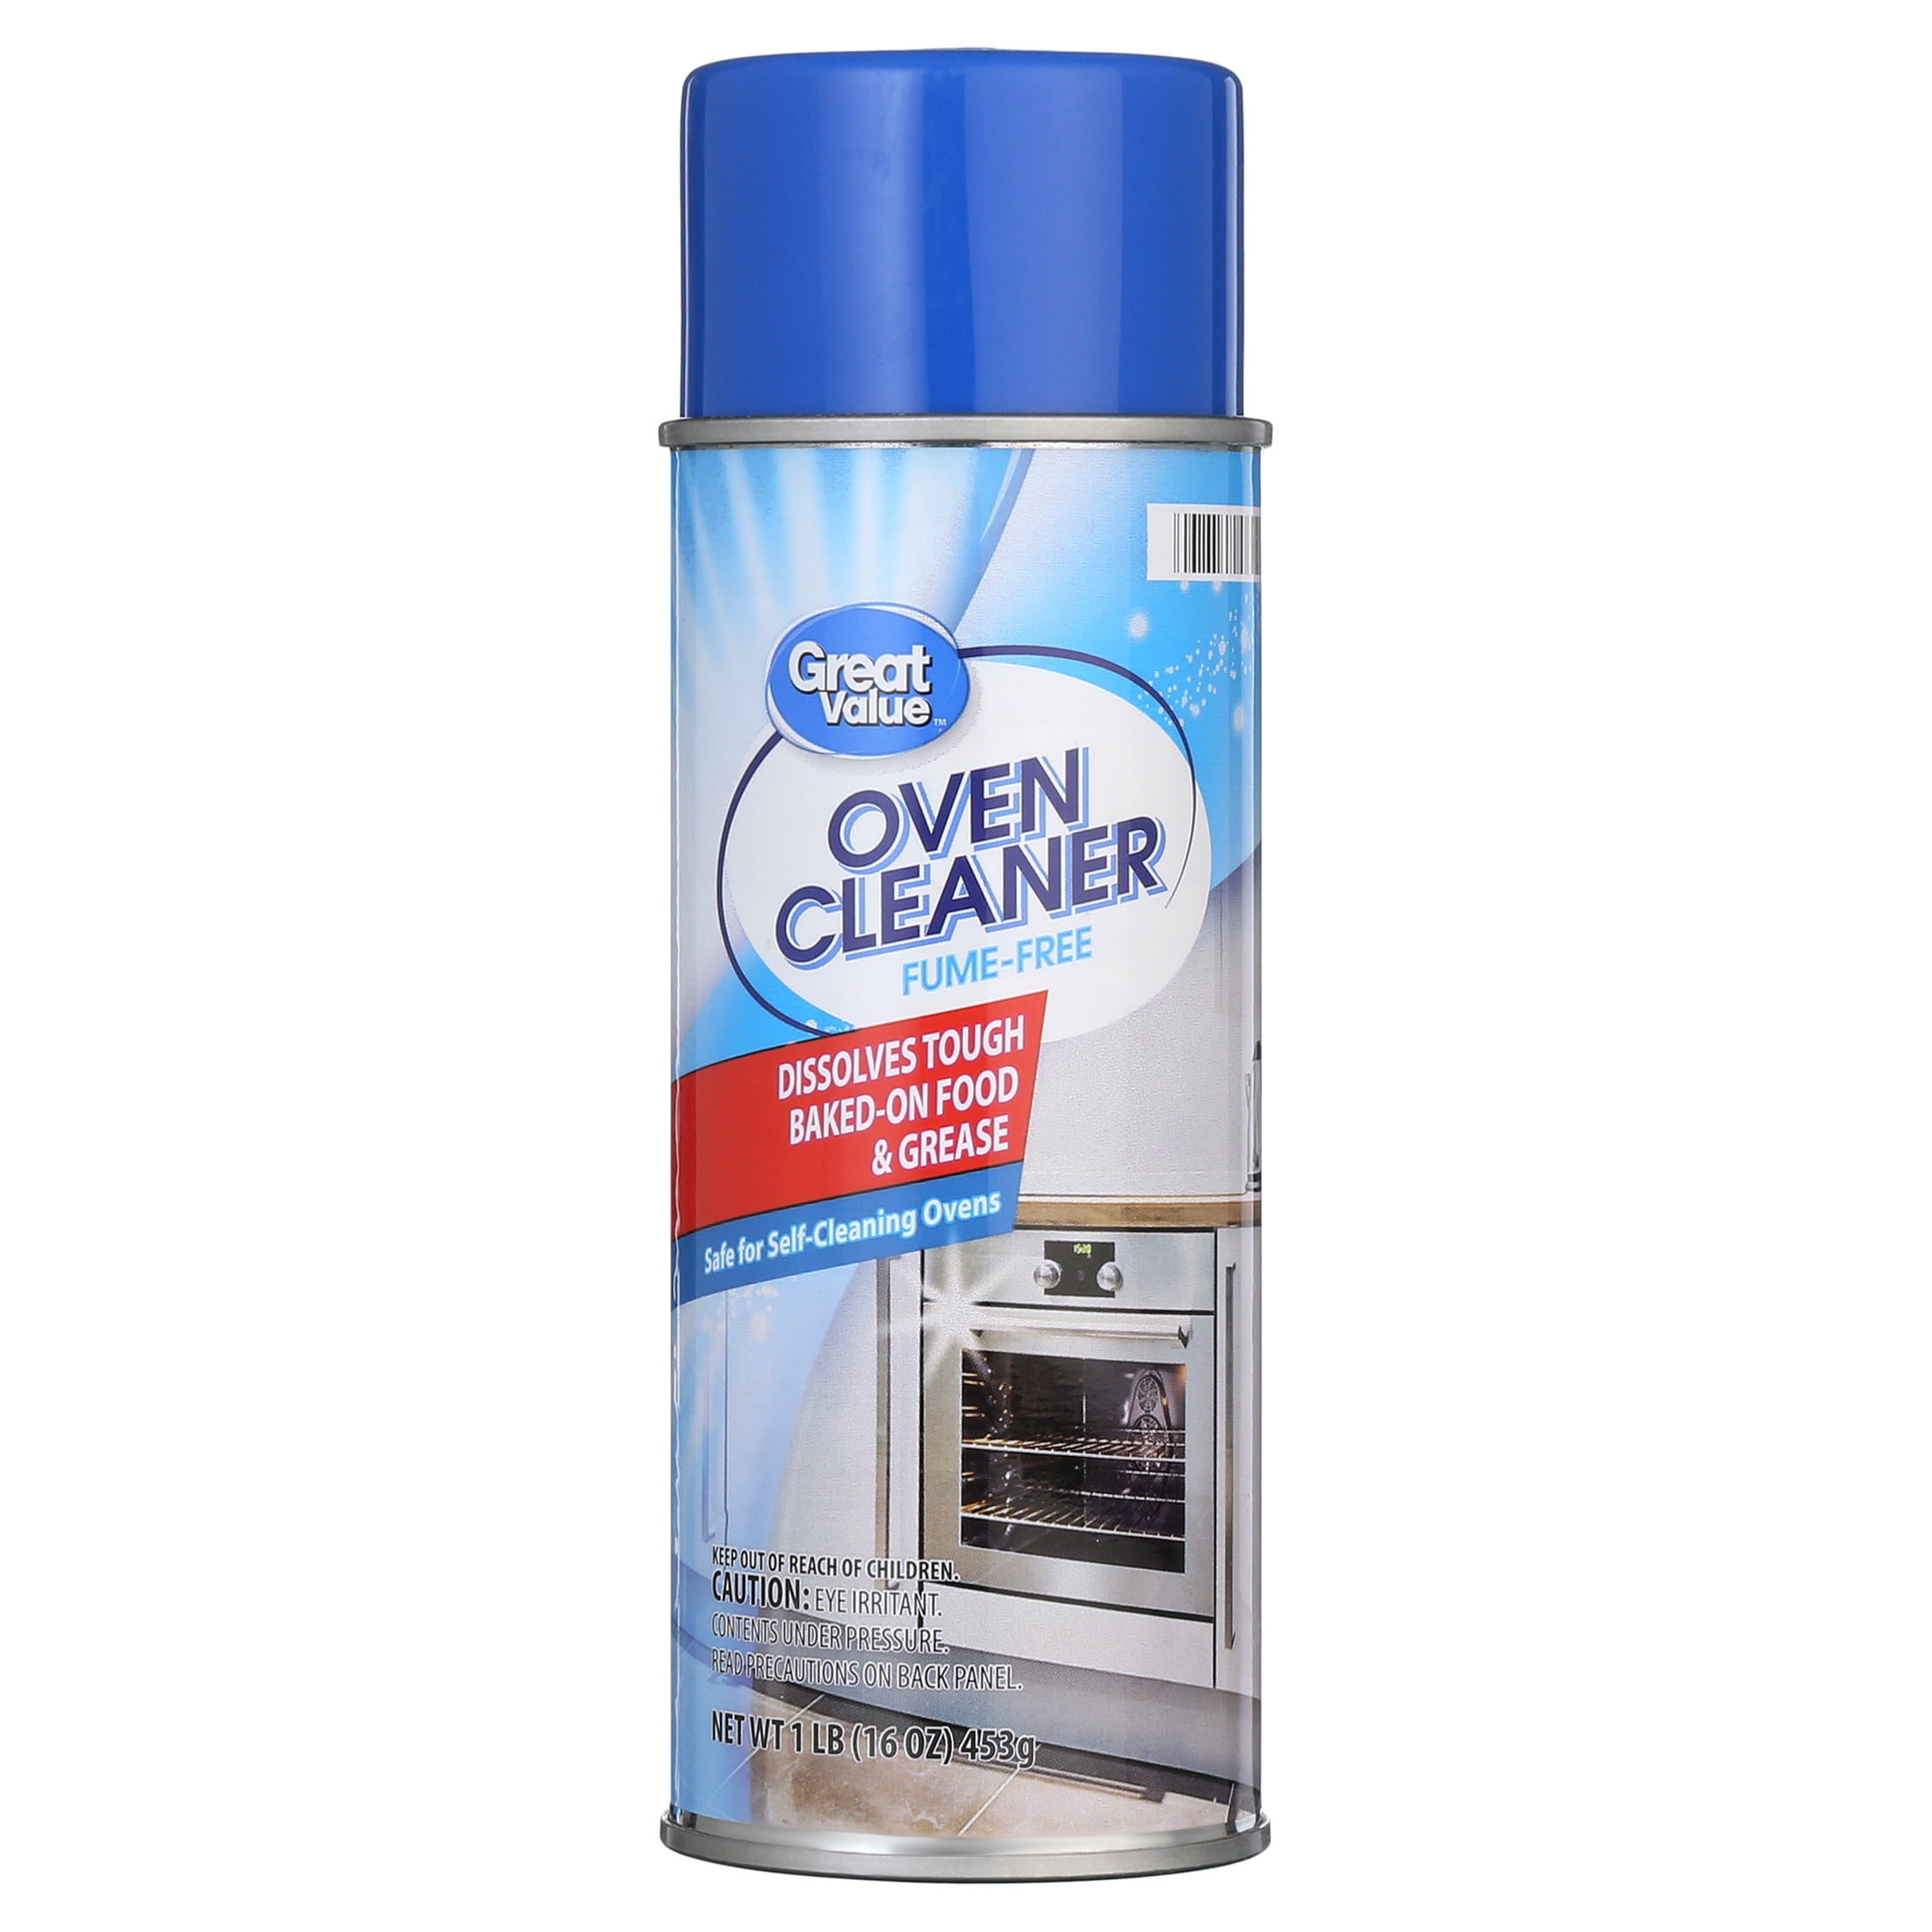 Quality Chemical Oven Cleaner & Grill Cleaner - Heavy-Duty/Fast Acting &  Easy to Use/Degreaser/Heavy Duty Oven Cleaner/Best Oven Cleaner/Made in USA  